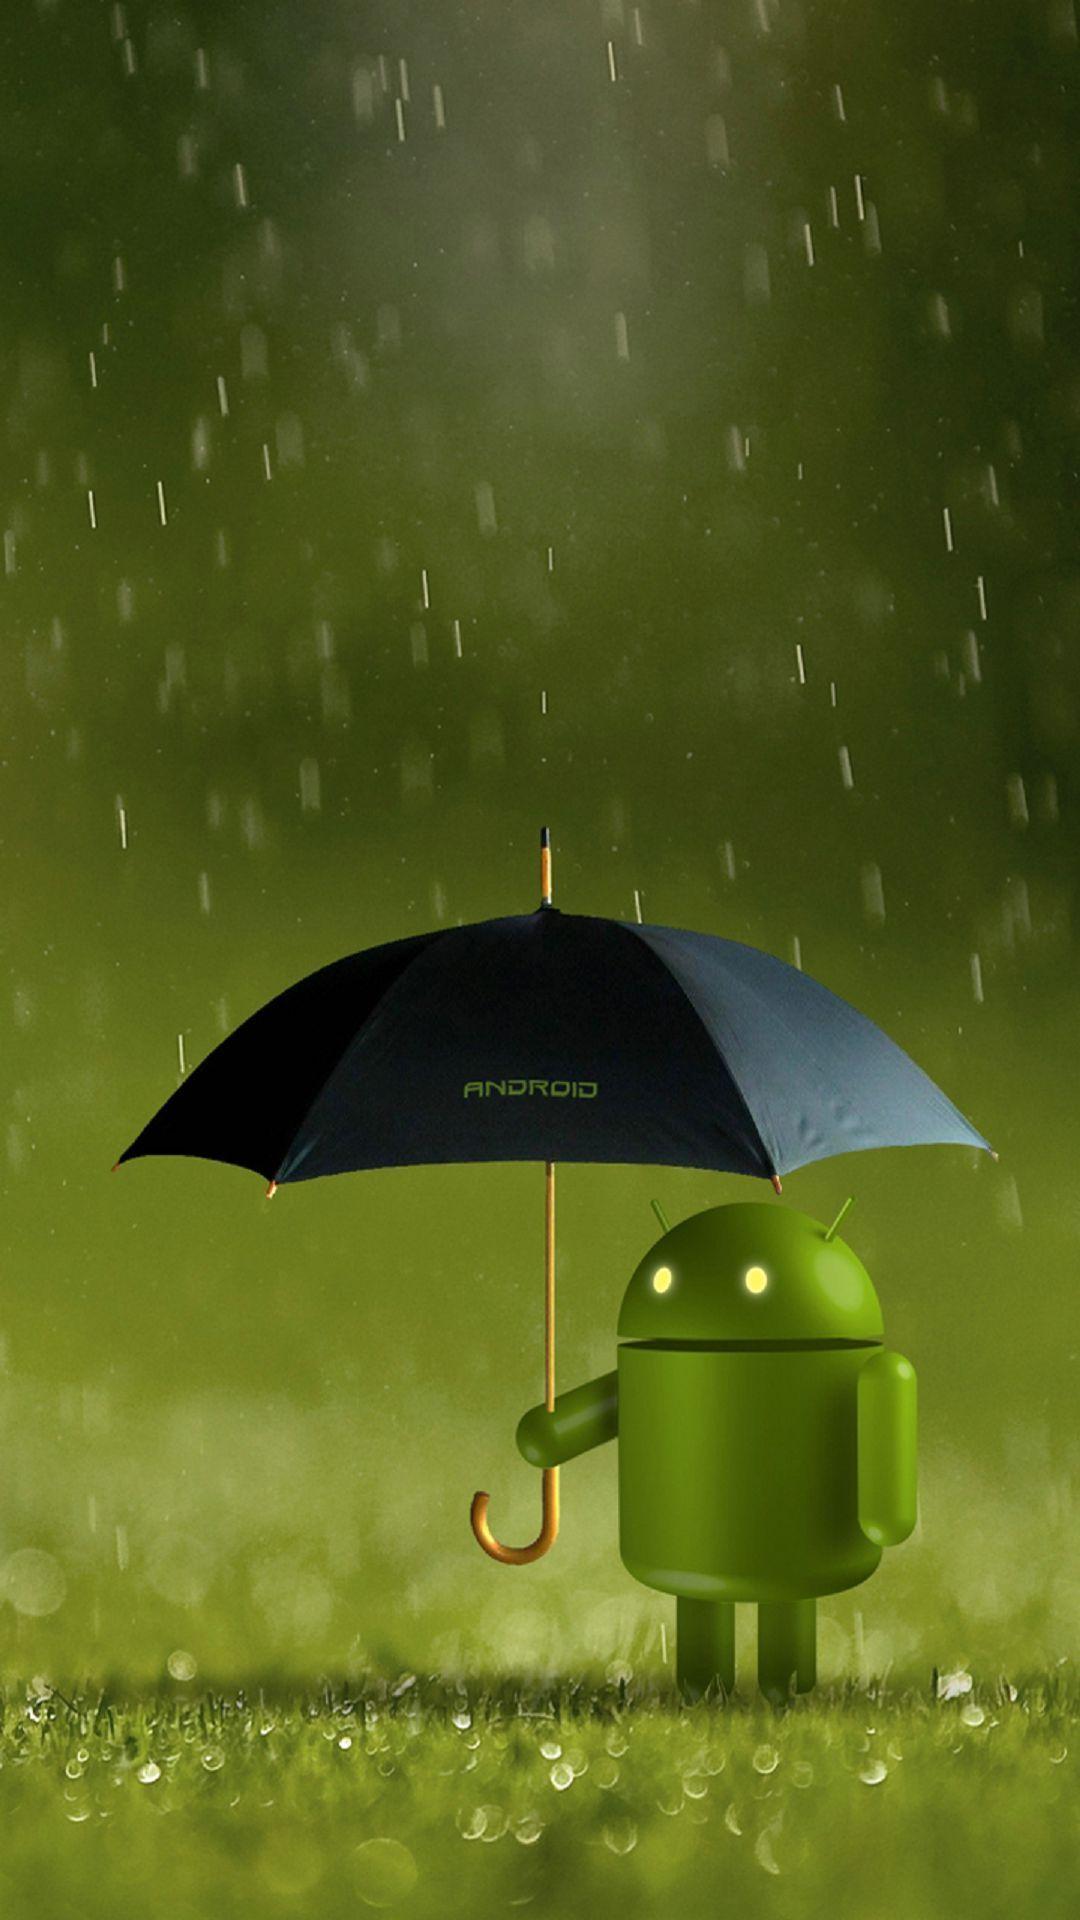 Android Robot In The Rain Black Umbrella Android Wallpaper free download